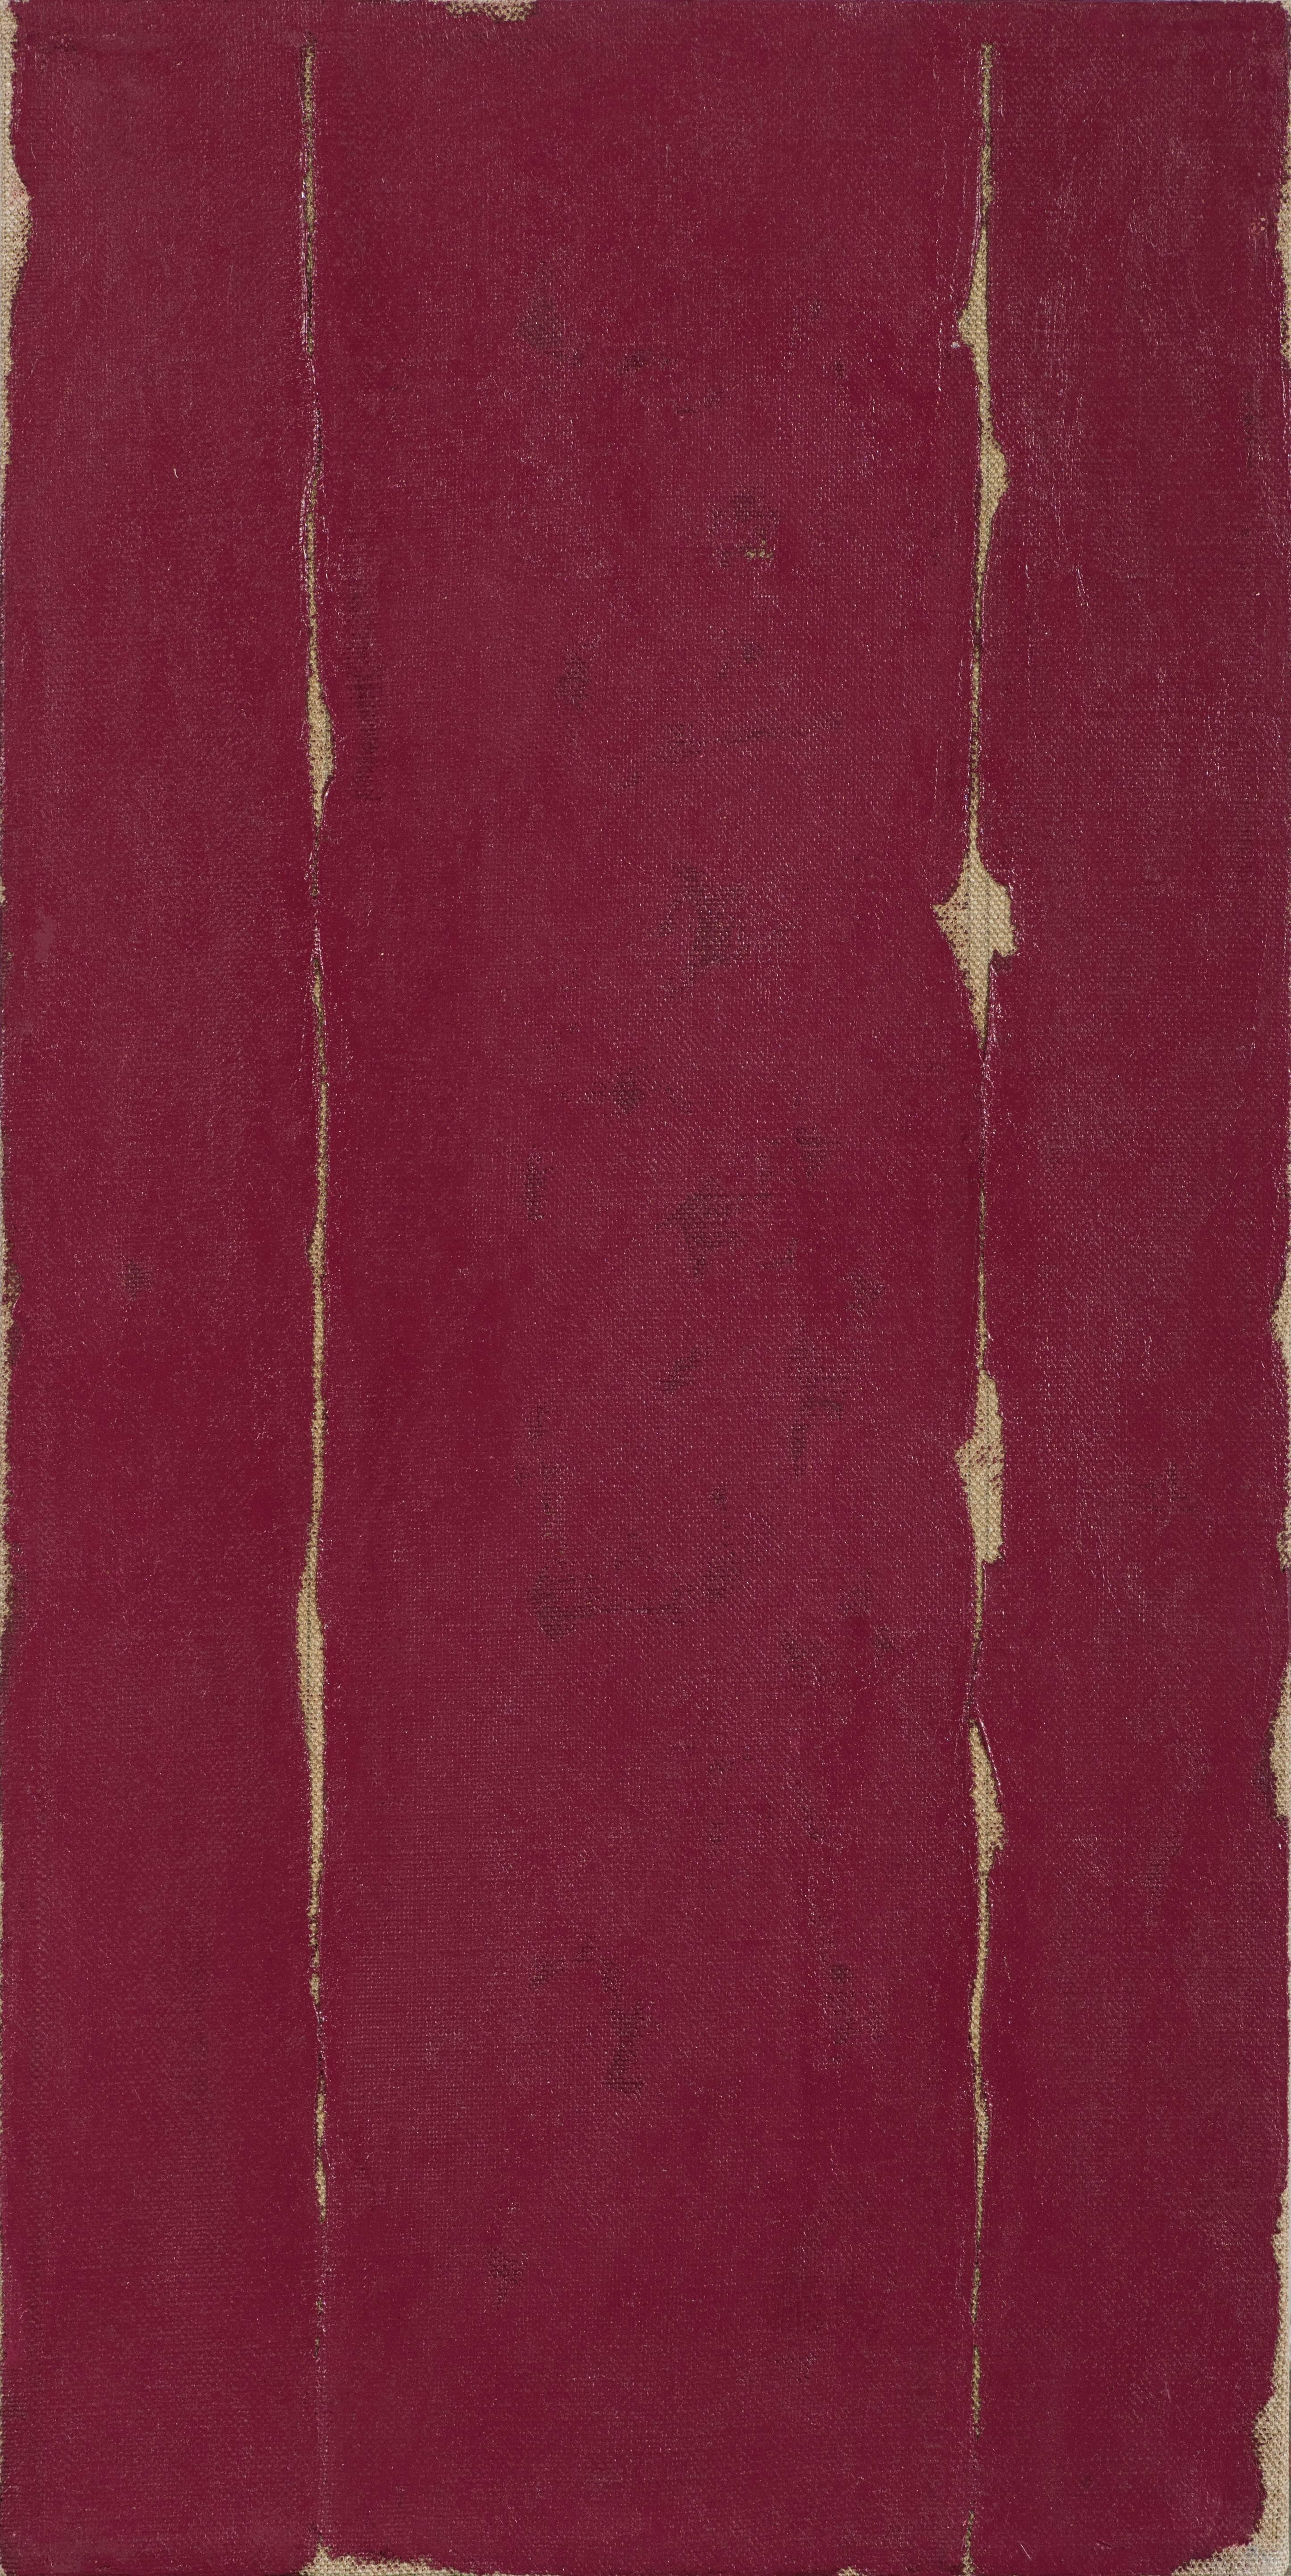 Untitled Red (1979)